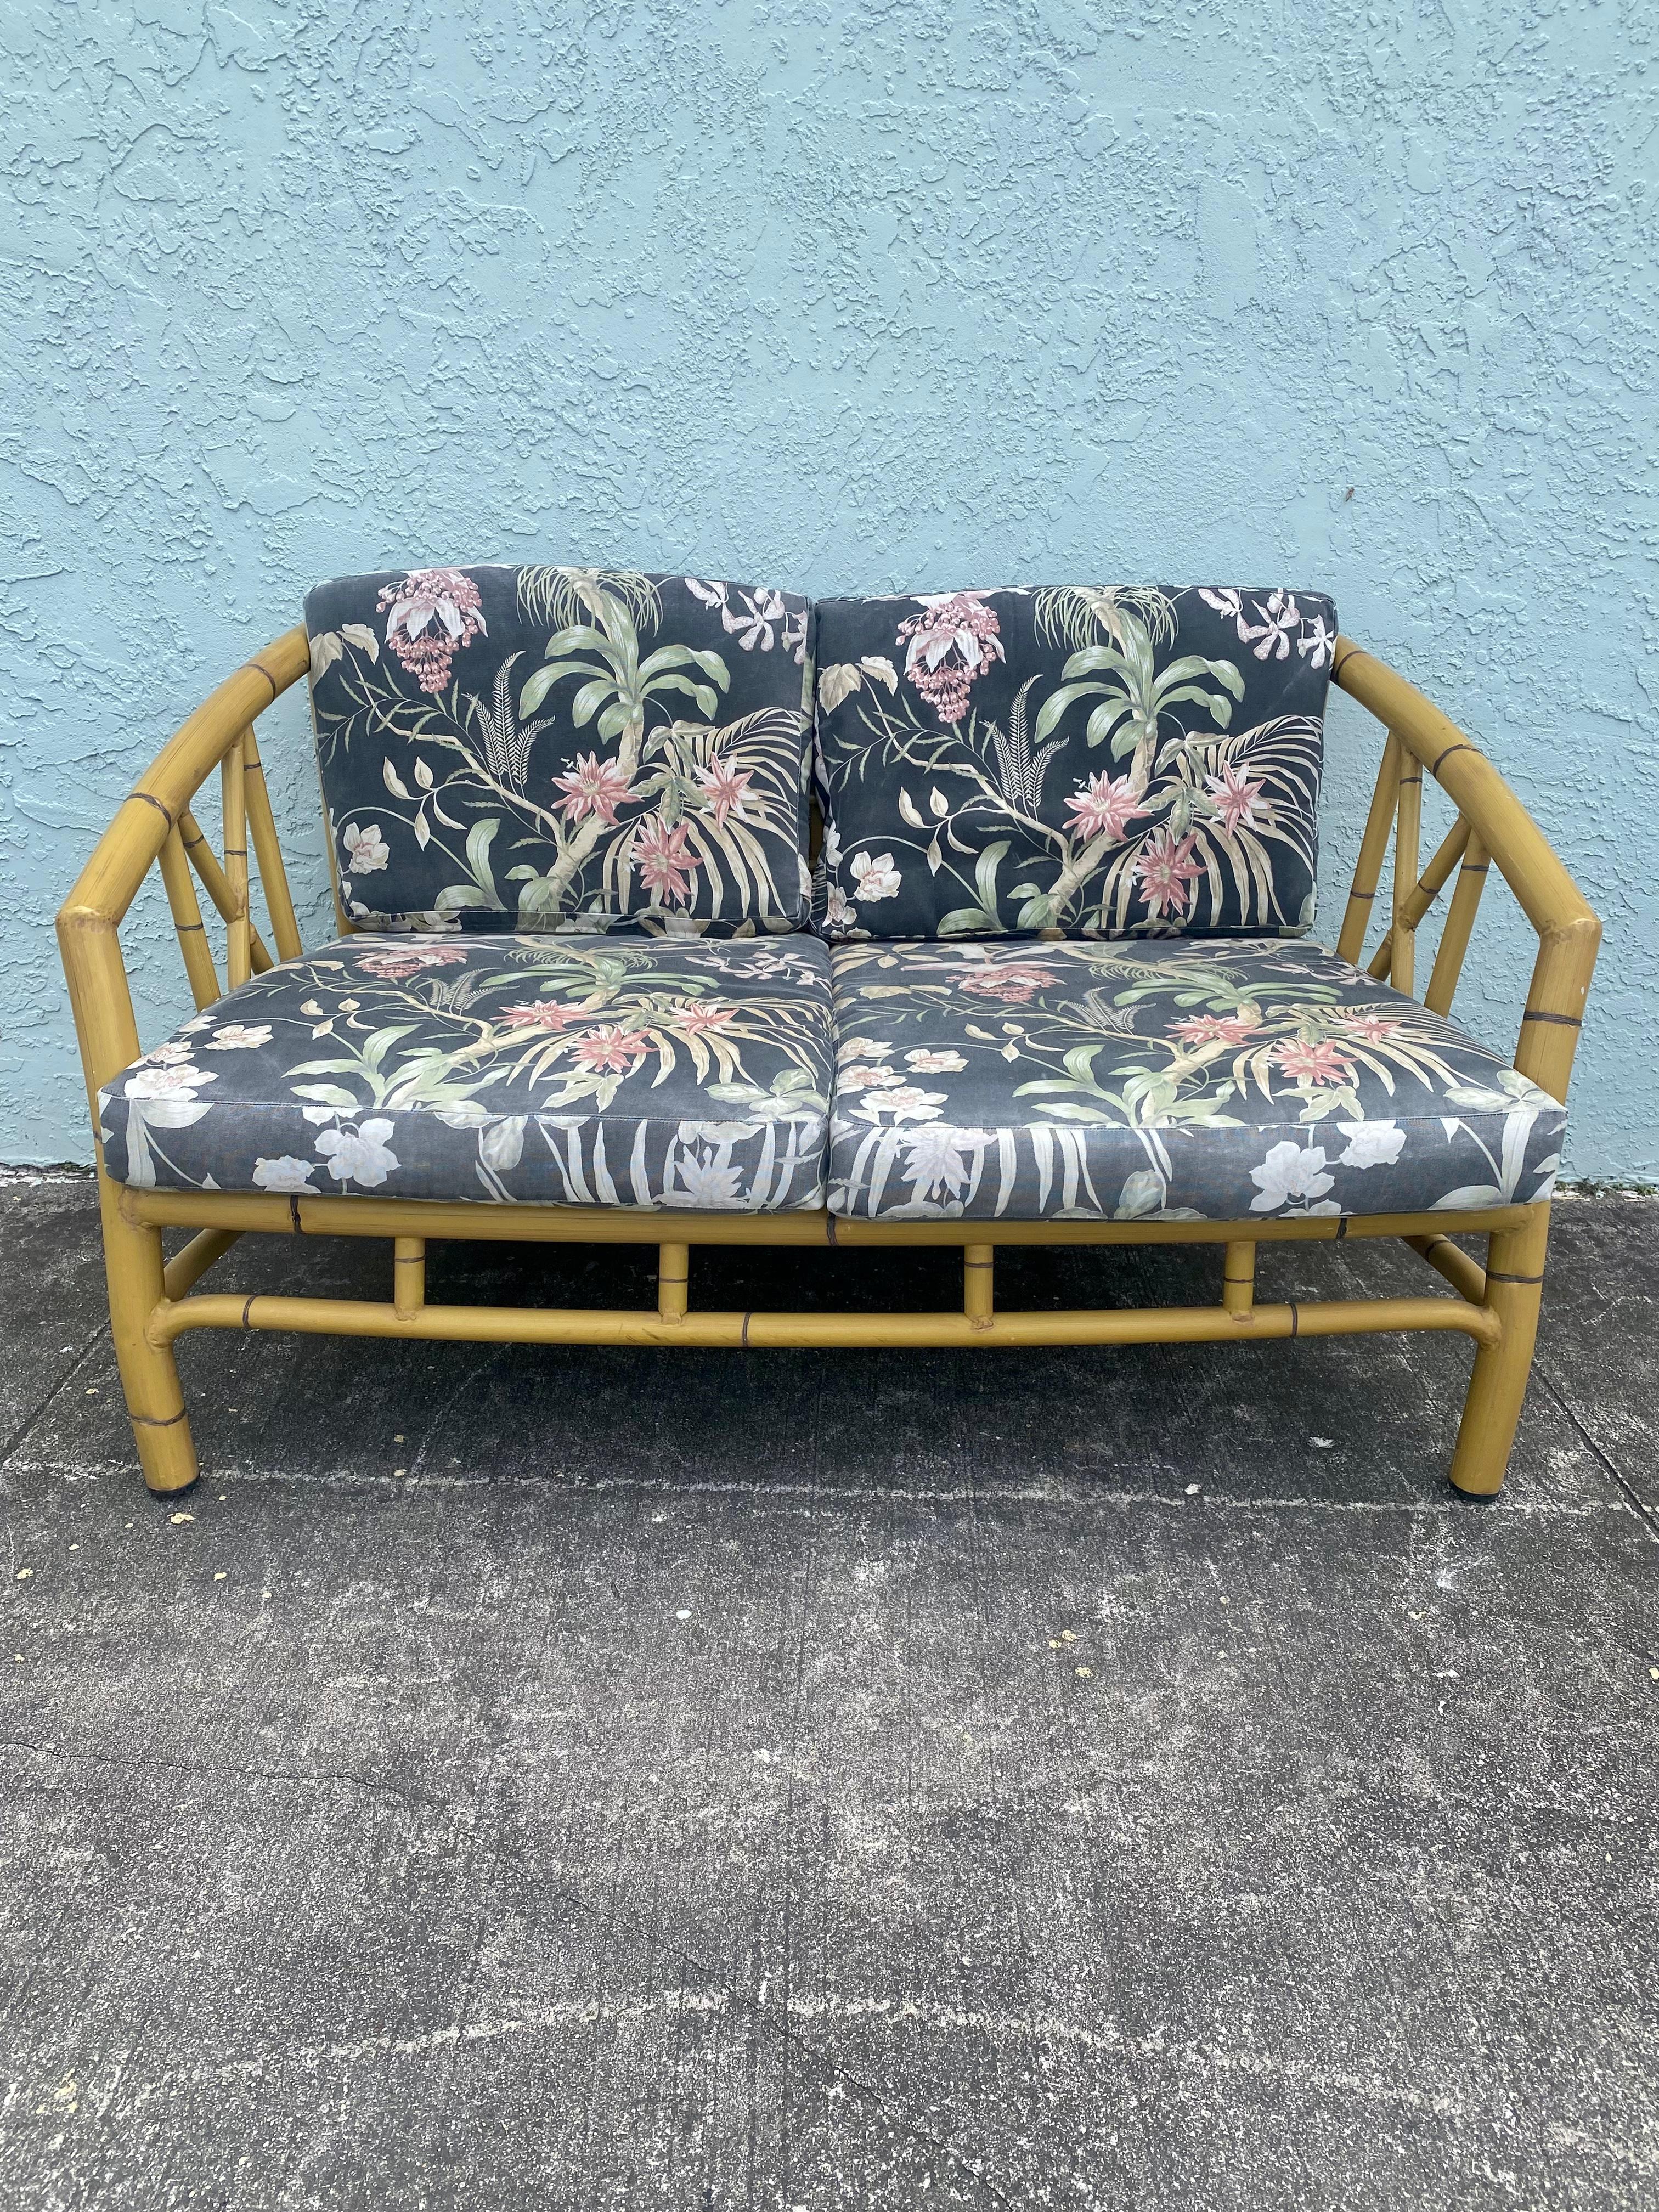 1970s Faux Rattan Chinoiserie Style Aluminum Sofa Chairs, Set 3 In Good Condition For Sale In Fort Lauderdale, FL